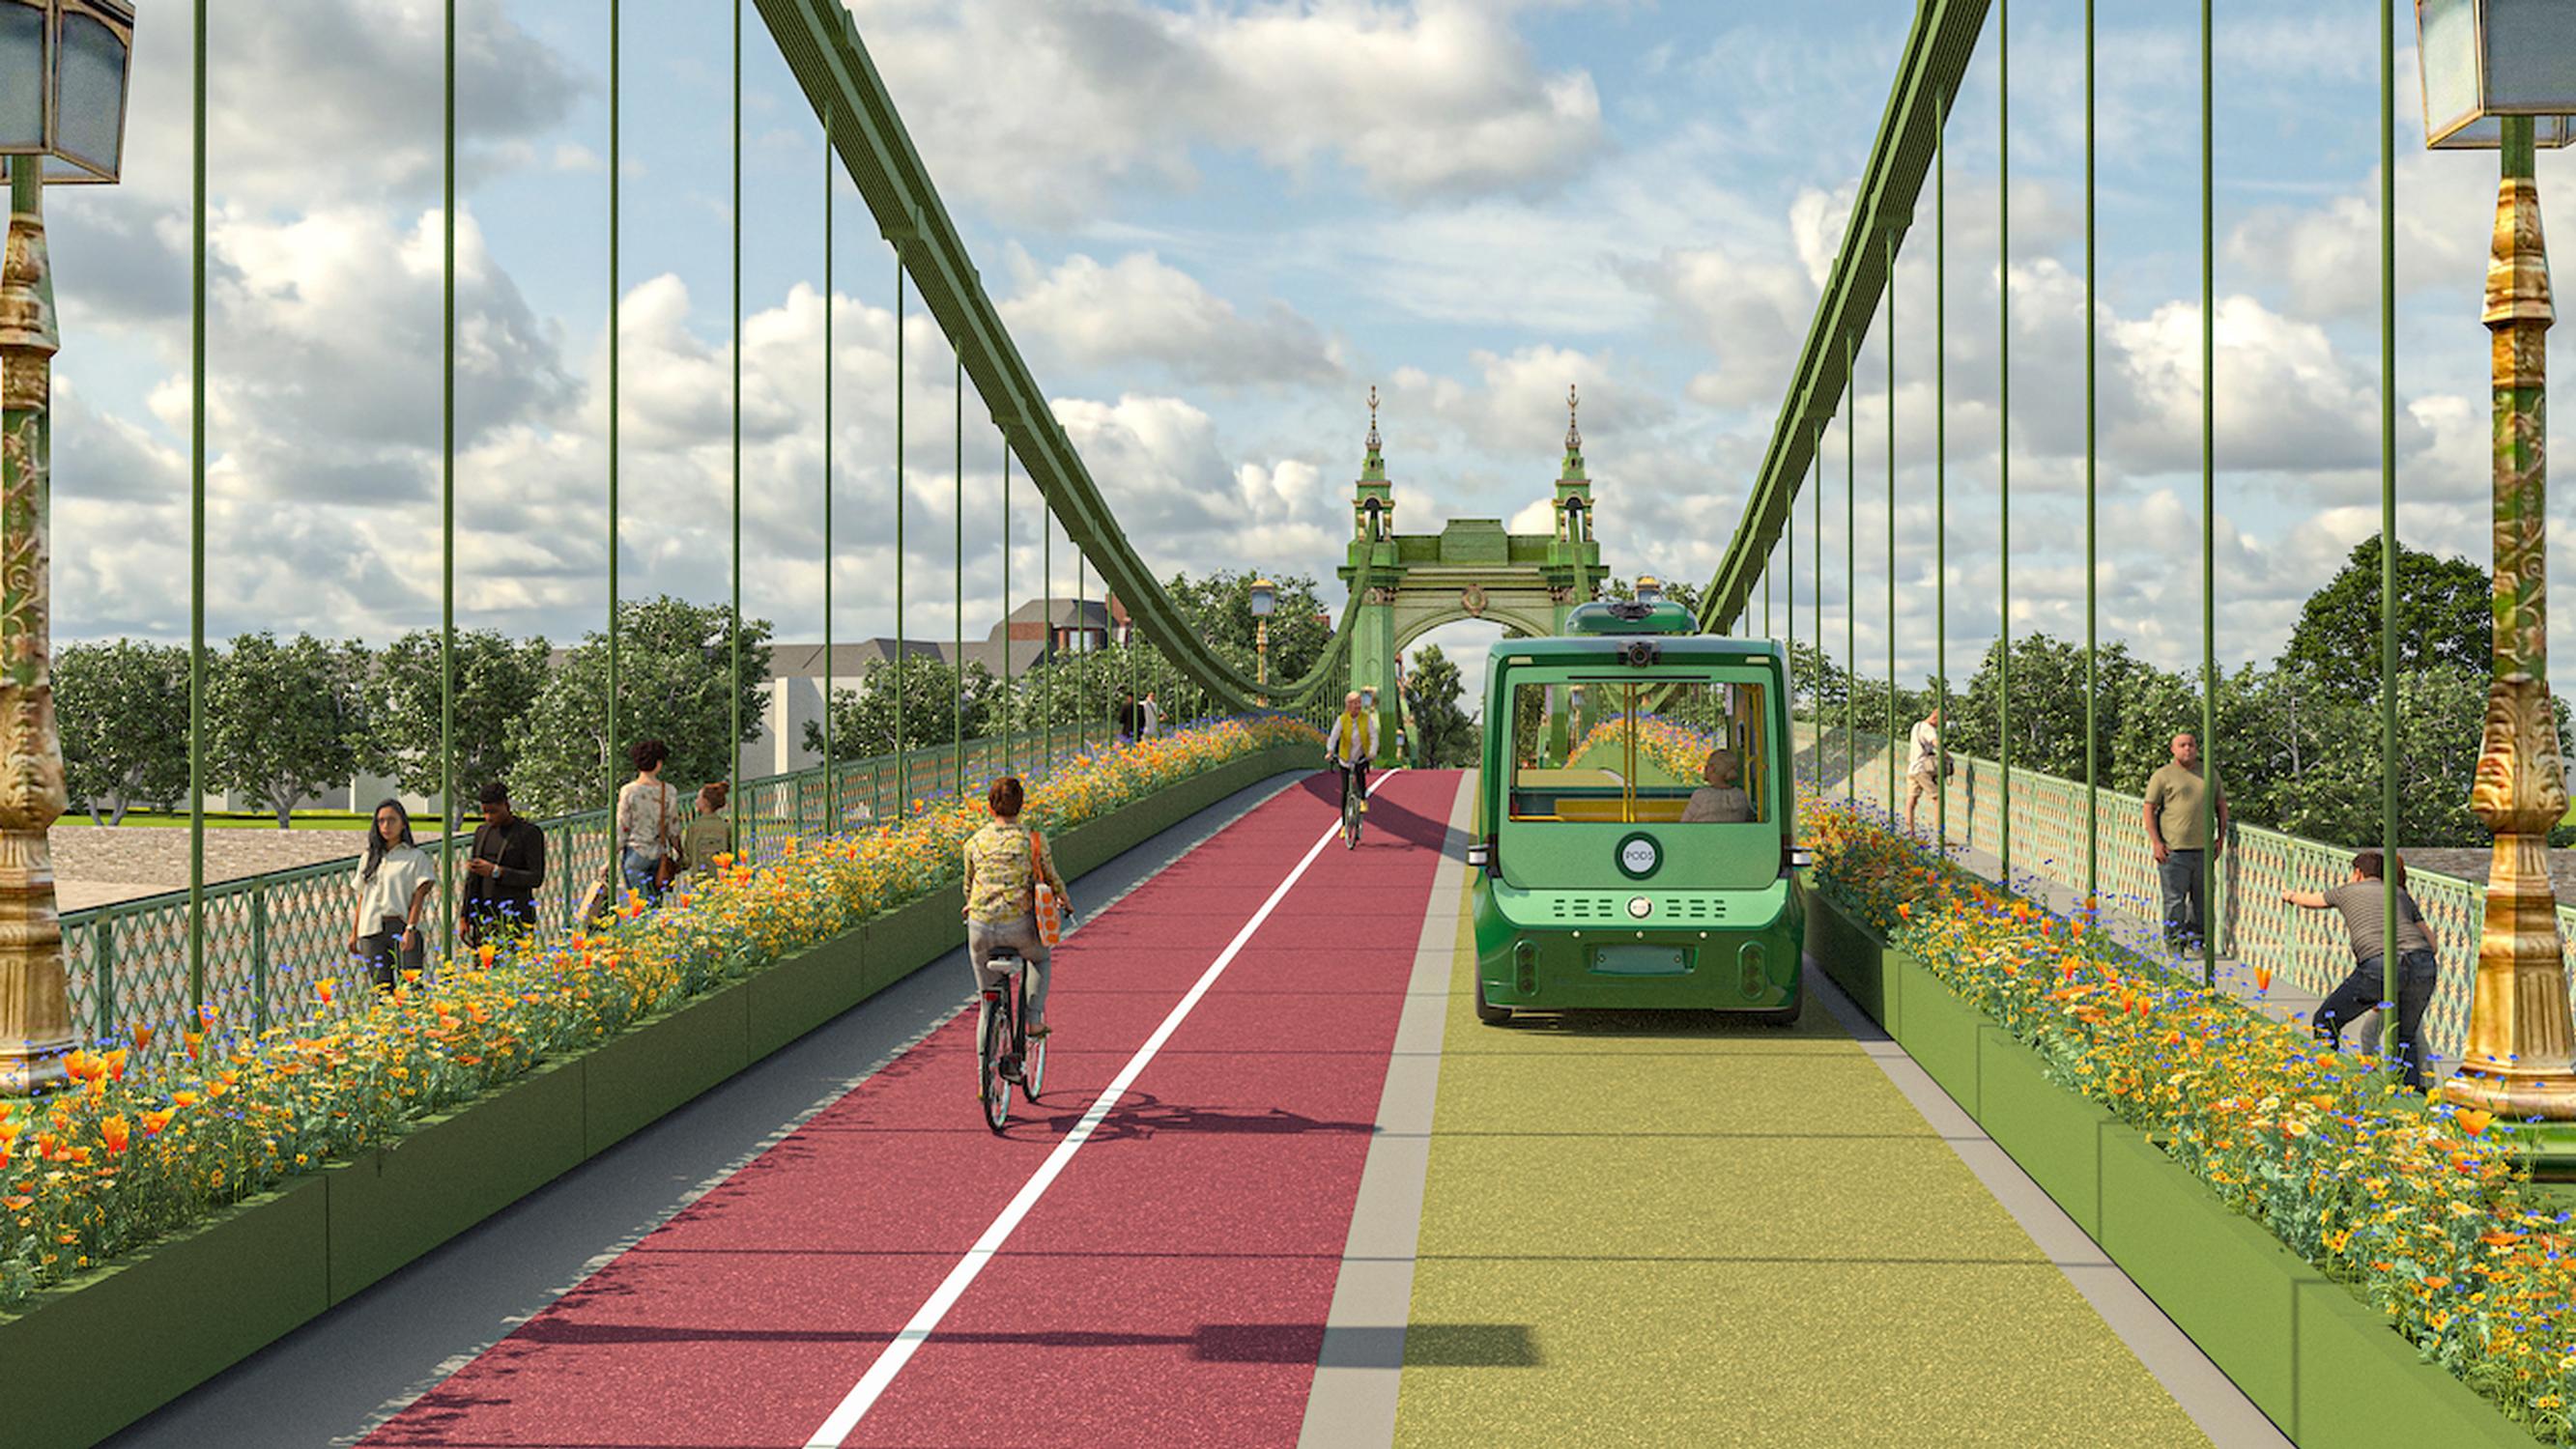 Possible’s proposal for Hammersmith Bridge would feature two-way protected cycle lane and walkways adjacent to a route for autonomous pods